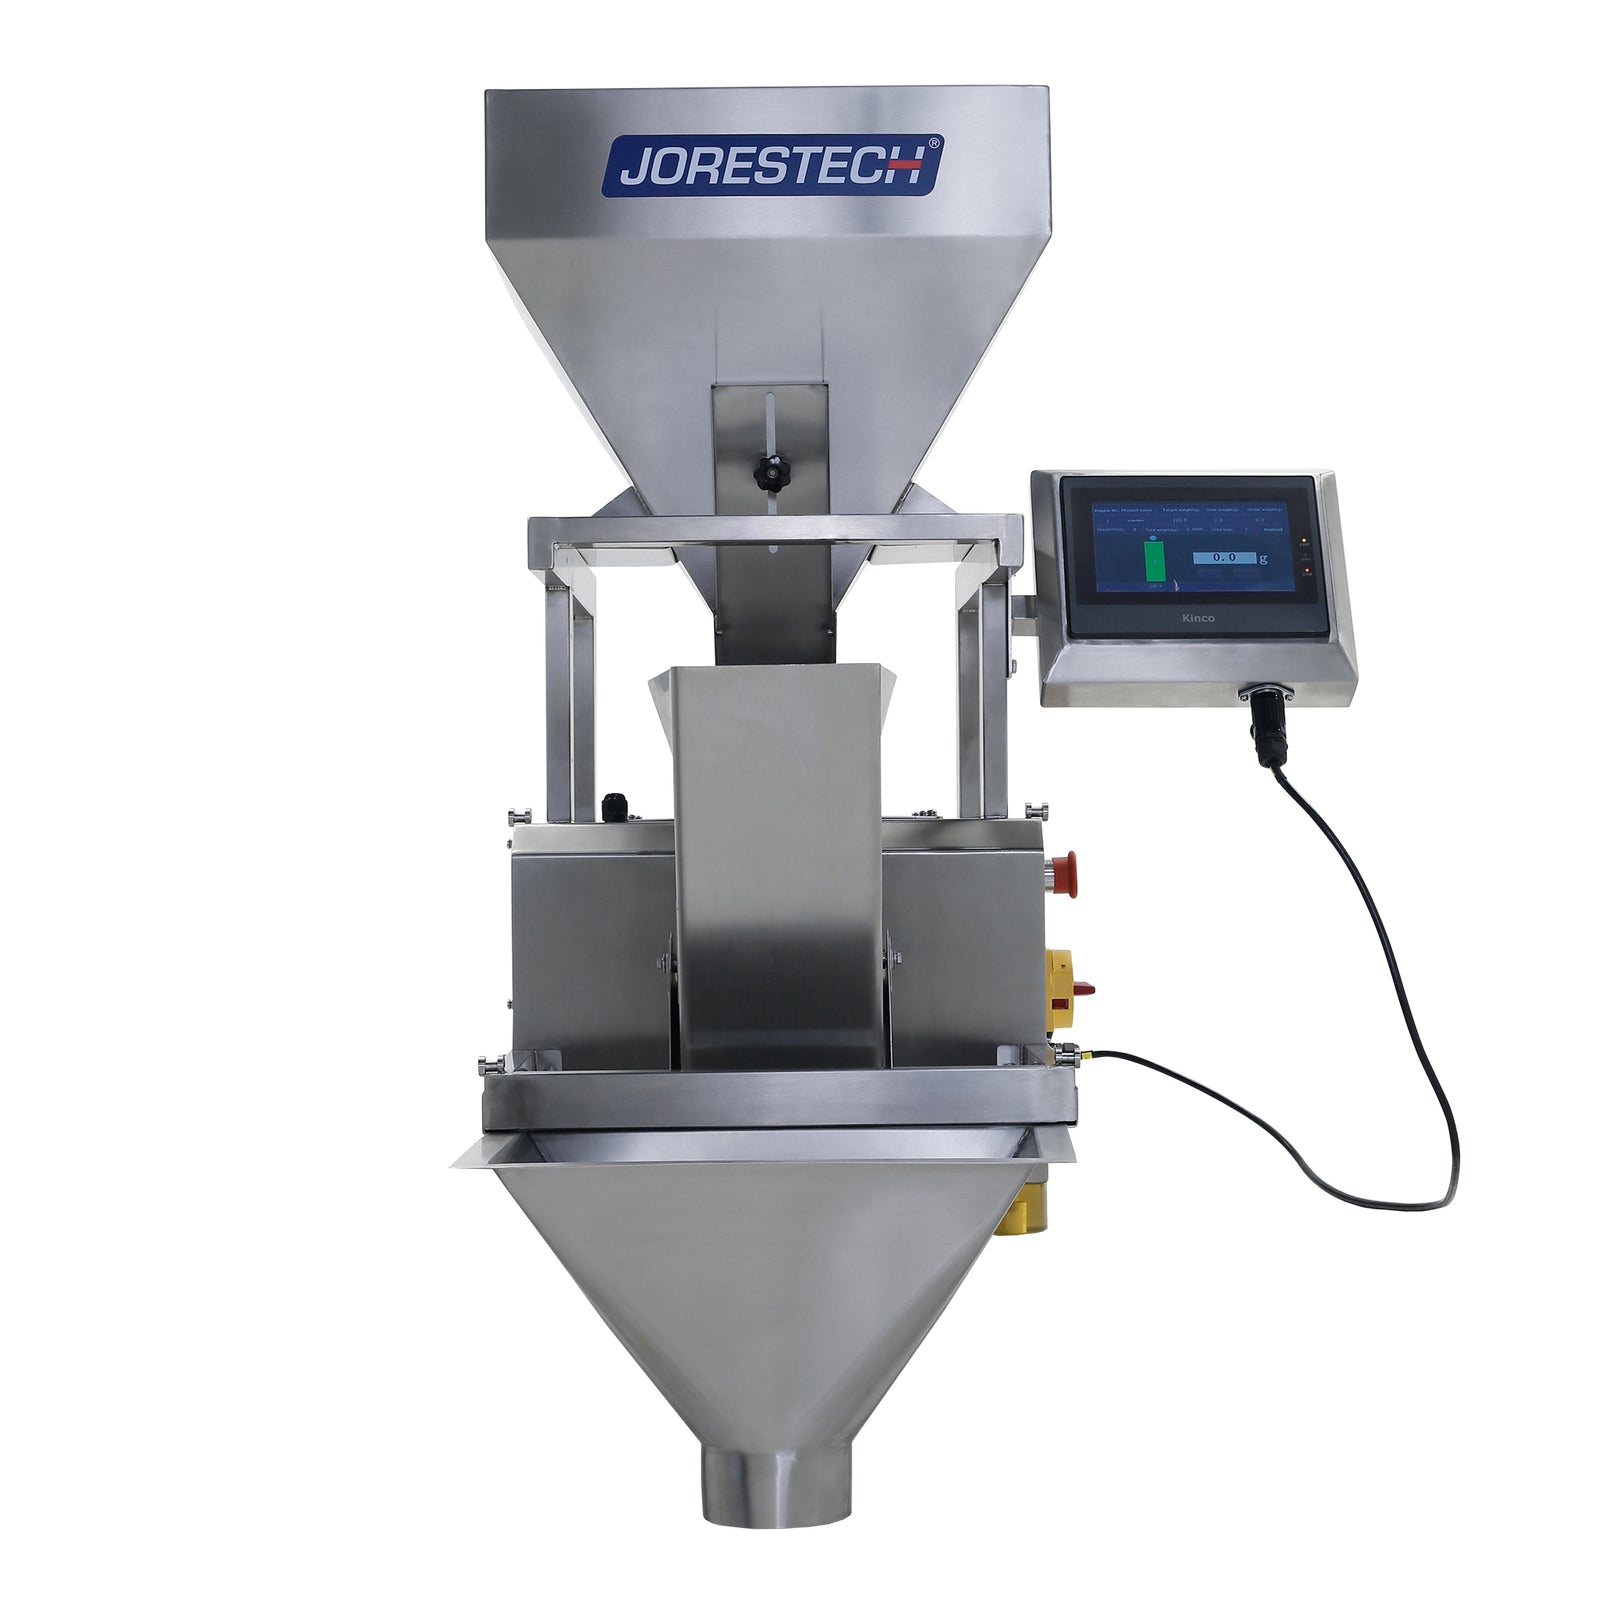 JORES TECHNOLOGIES® linear weigher with touchscreen control panel. The transparent PC protector has been removed so the inner components are more exposed